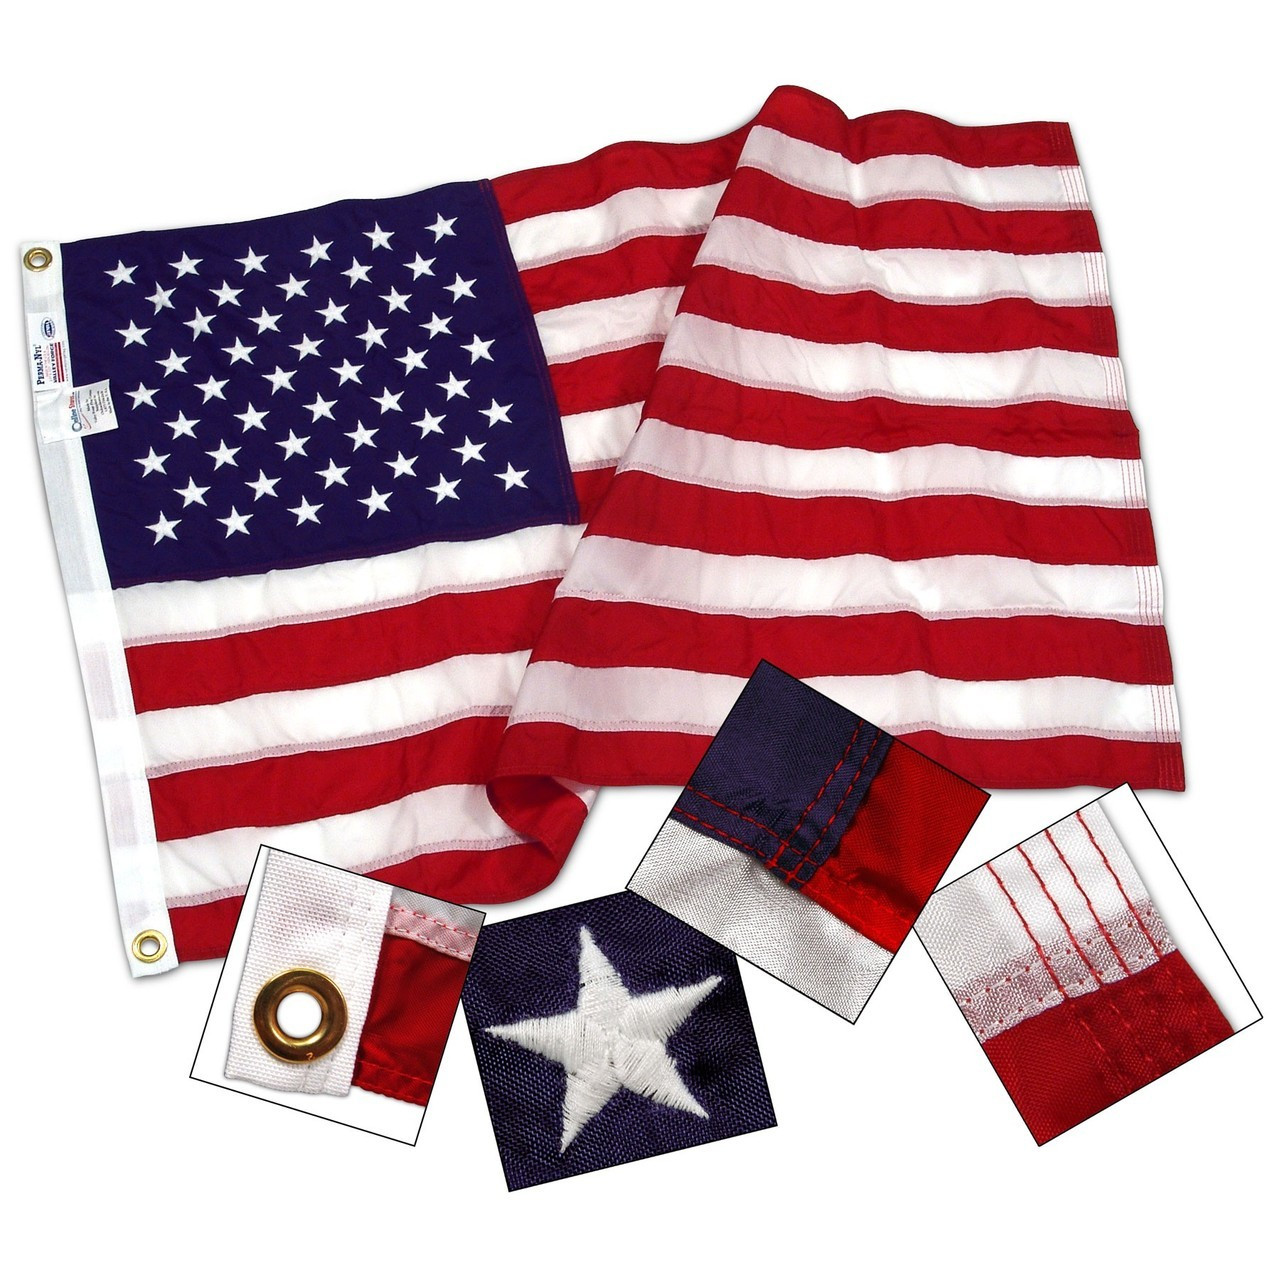 Details about   2.5 x 4 Embroidered Sewn USA American 50 Star Sythetic Cotton Nylon Flag Sleeve 